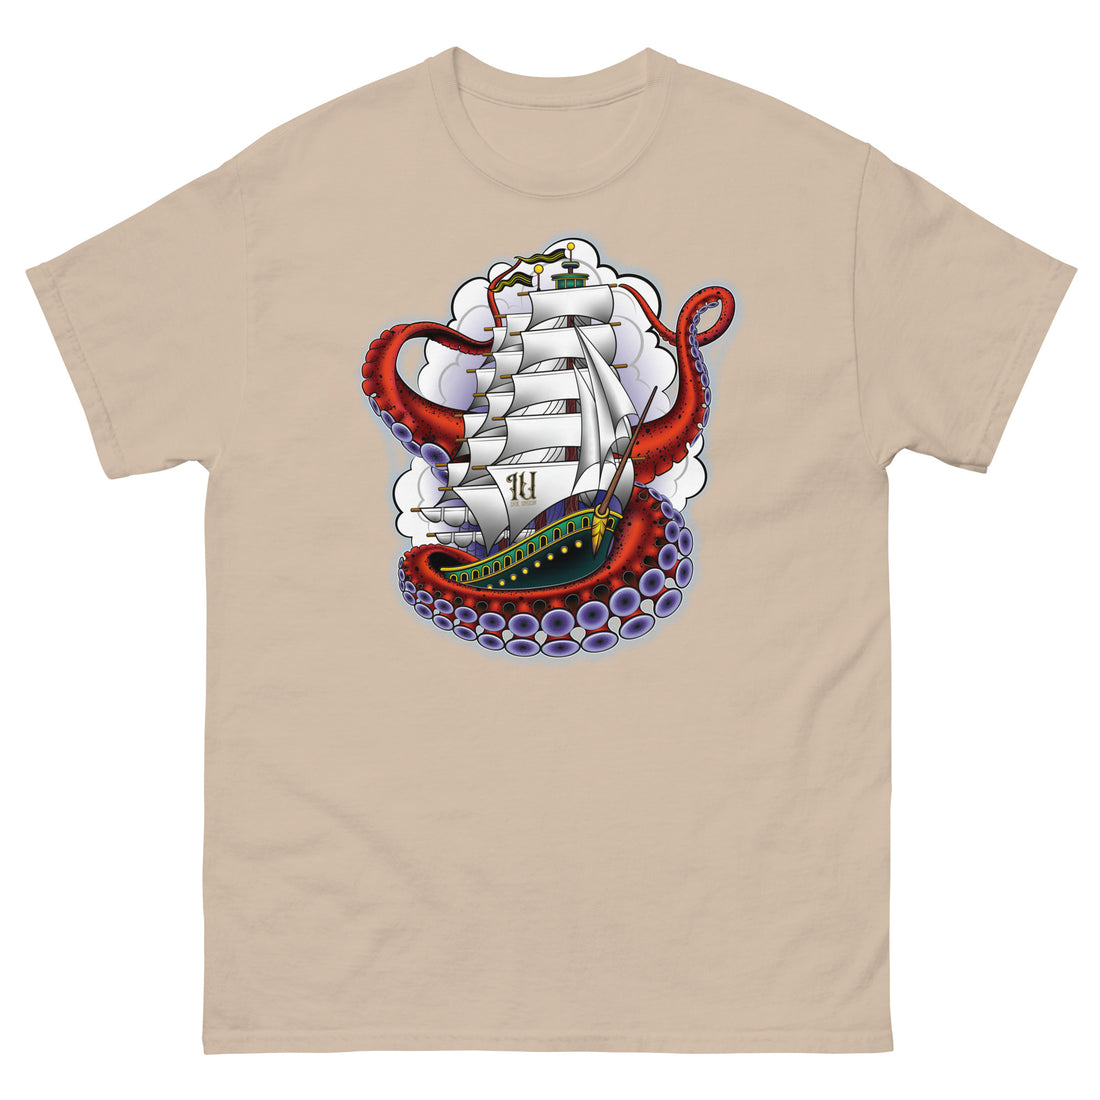 A light brown t-shirt with an old-school clipper ship tattoo design in green and brown with white sails surrounded by octopus tentacles in shades of red with purple tentacles. Behind the ship are purple-tinged clouds.